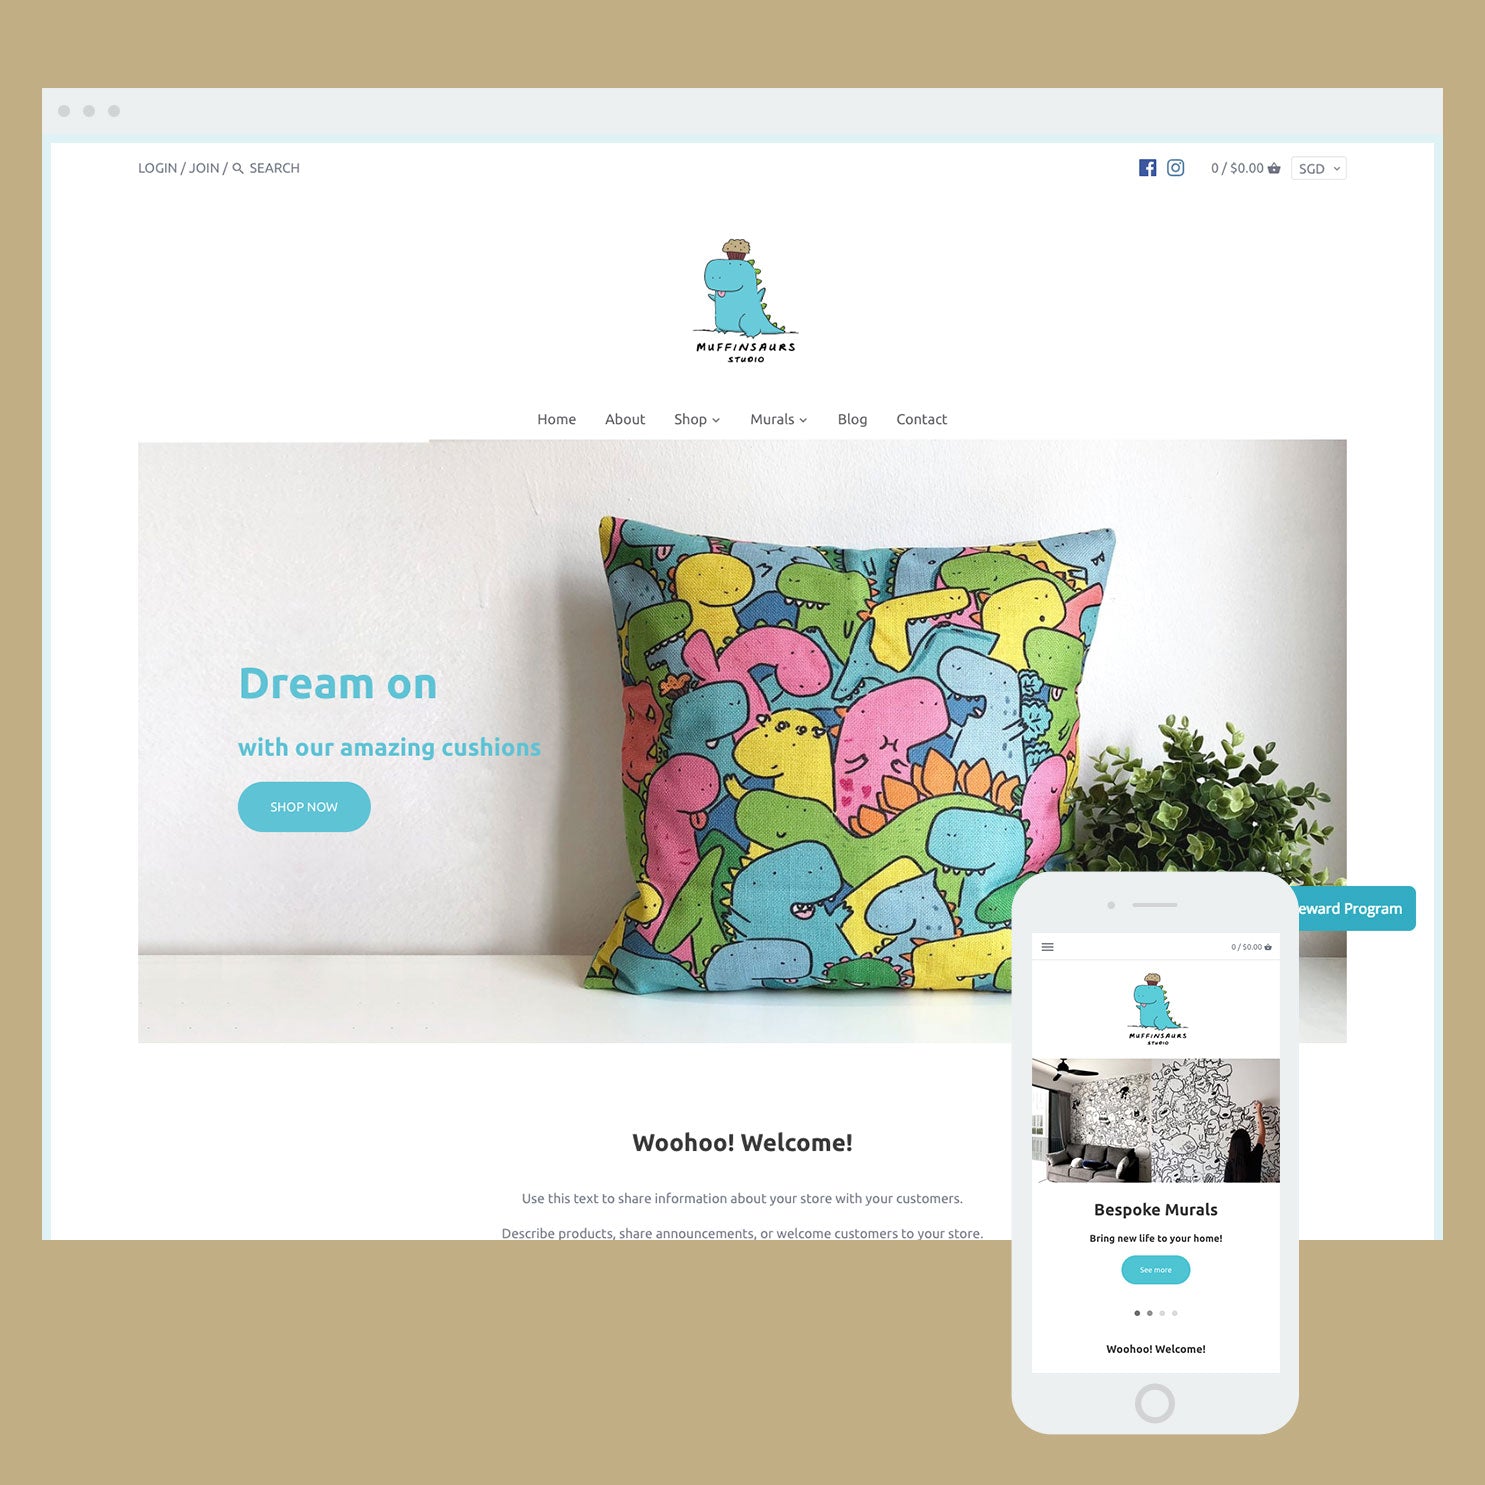 Muffinsaurs: Shopify store by Cooee Commerce